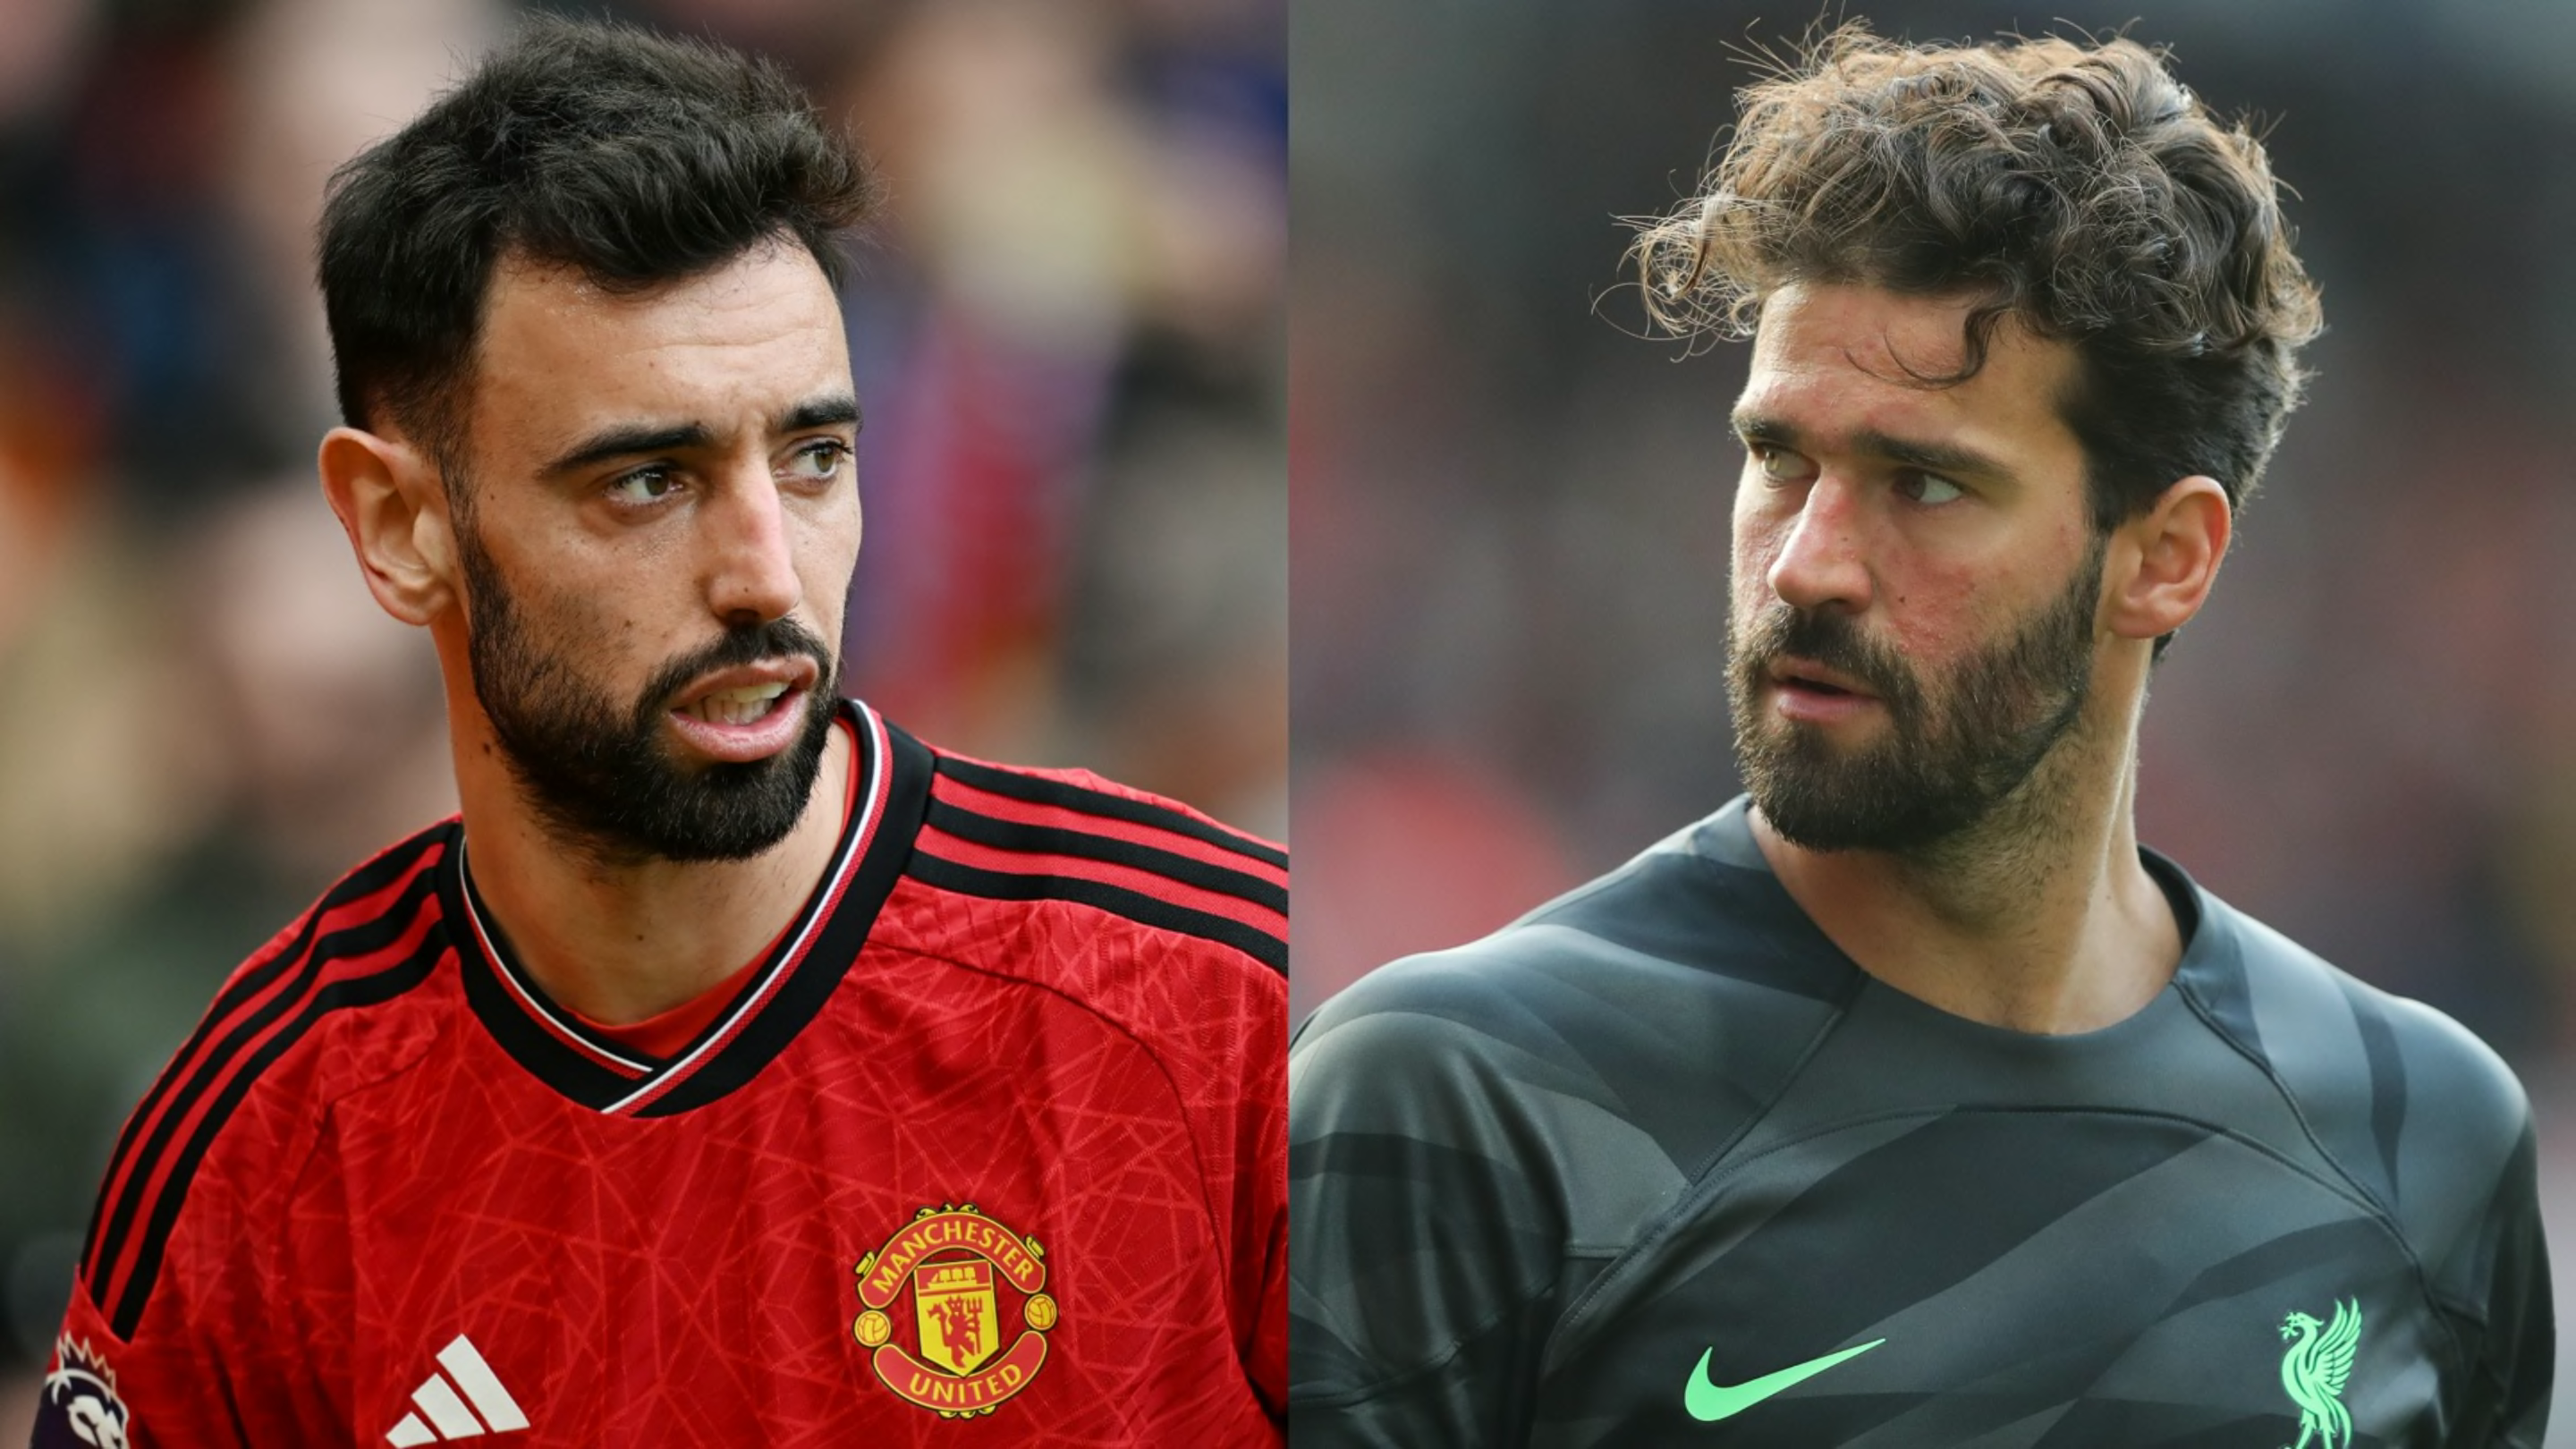 Bruno Fernandes & Alisson lead list of marquee Saudi Pro League targets - report